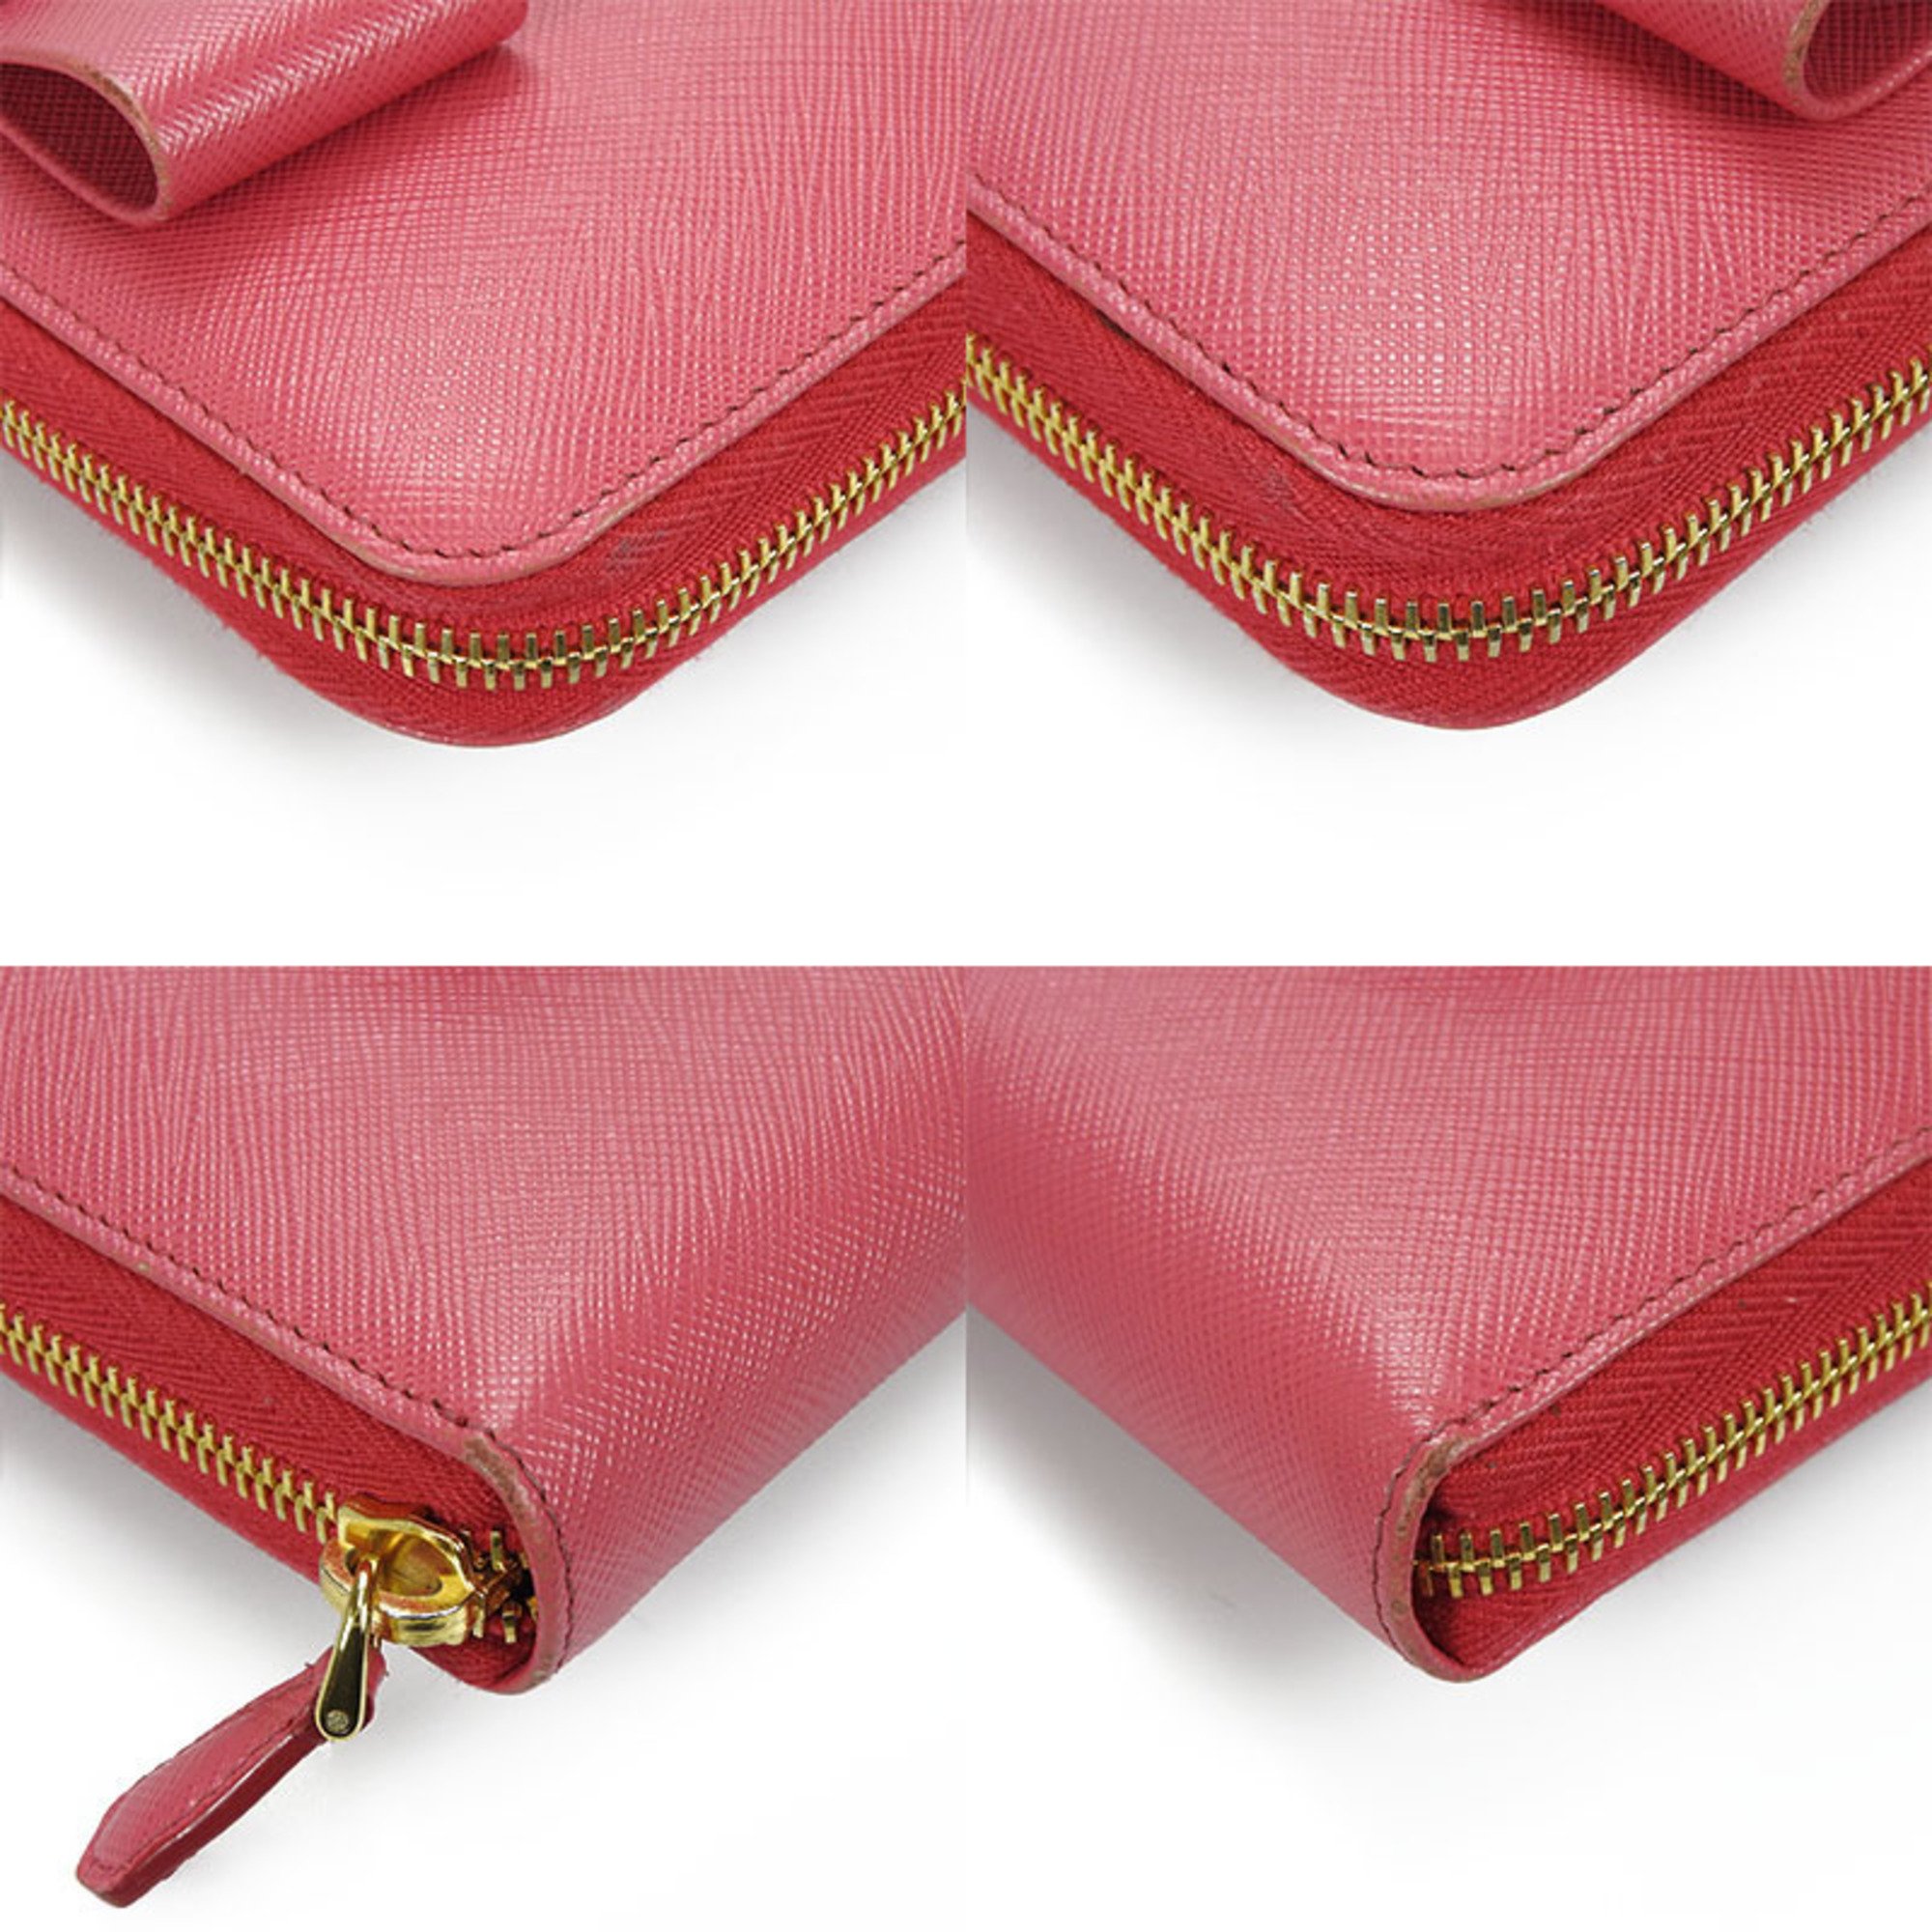 PRADA 1ML506 Saffiano round zipper long wallet ribbon 12 cards pink with box leather gold hardware zip around peonia